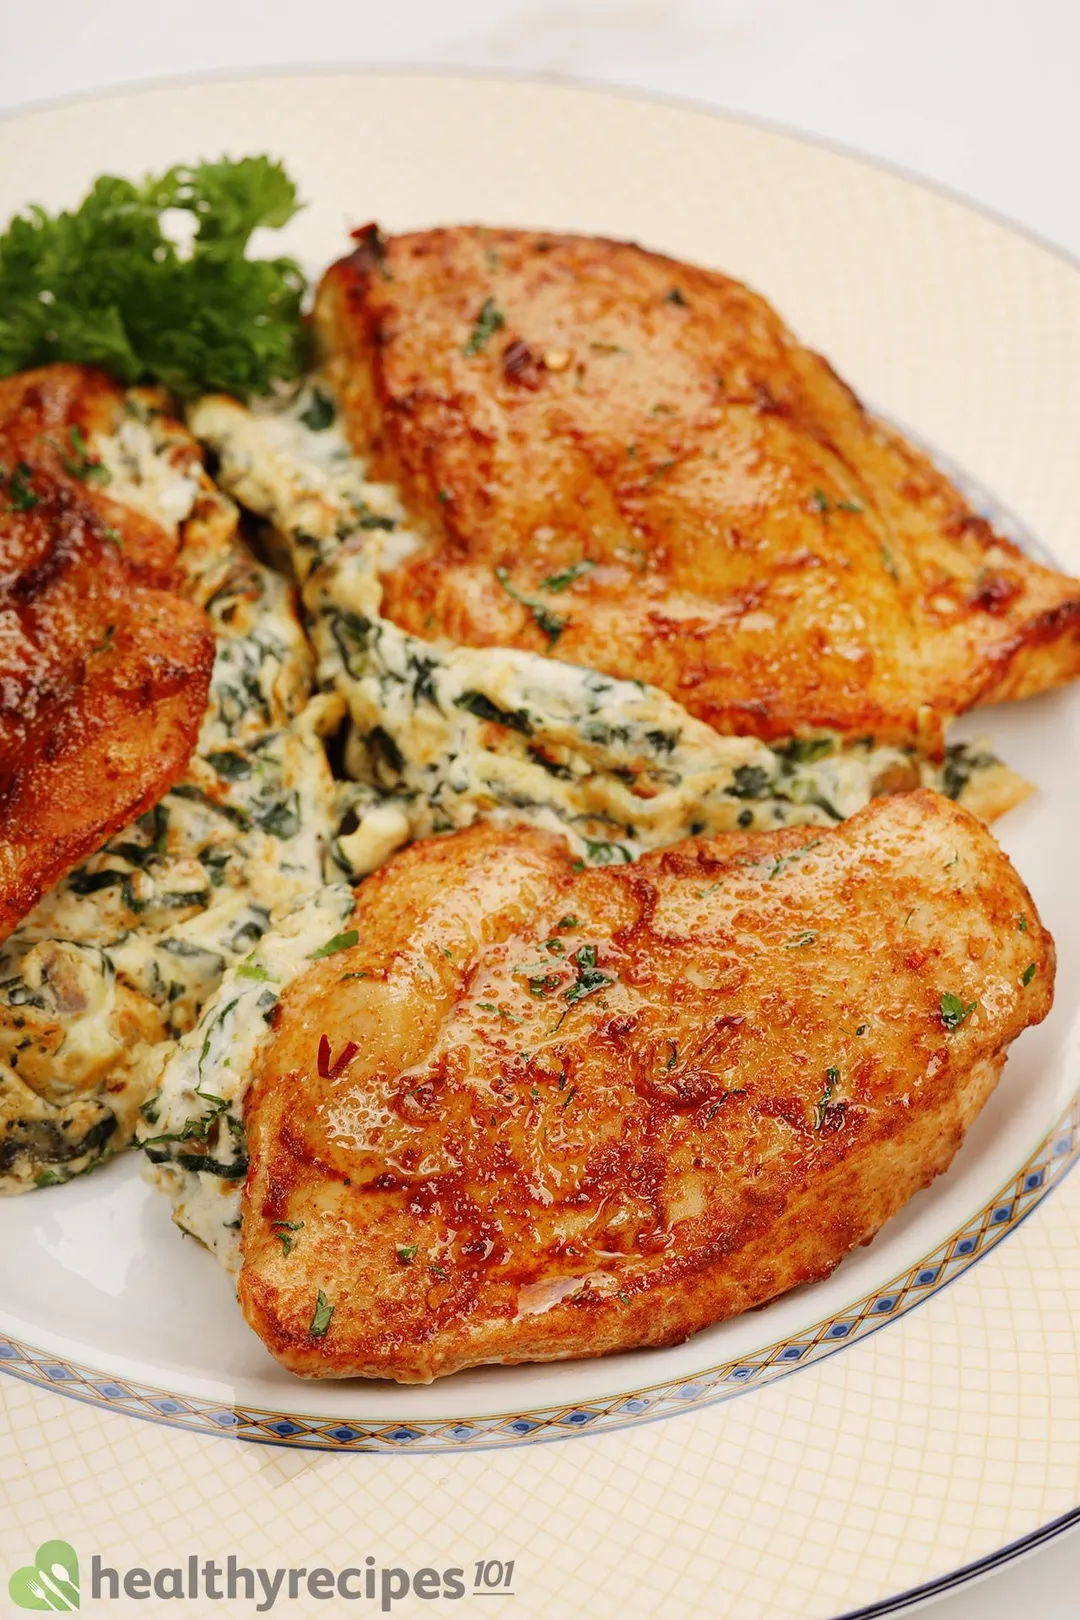 three cooked stuffed chicken breasts on a plate decorated with parsley